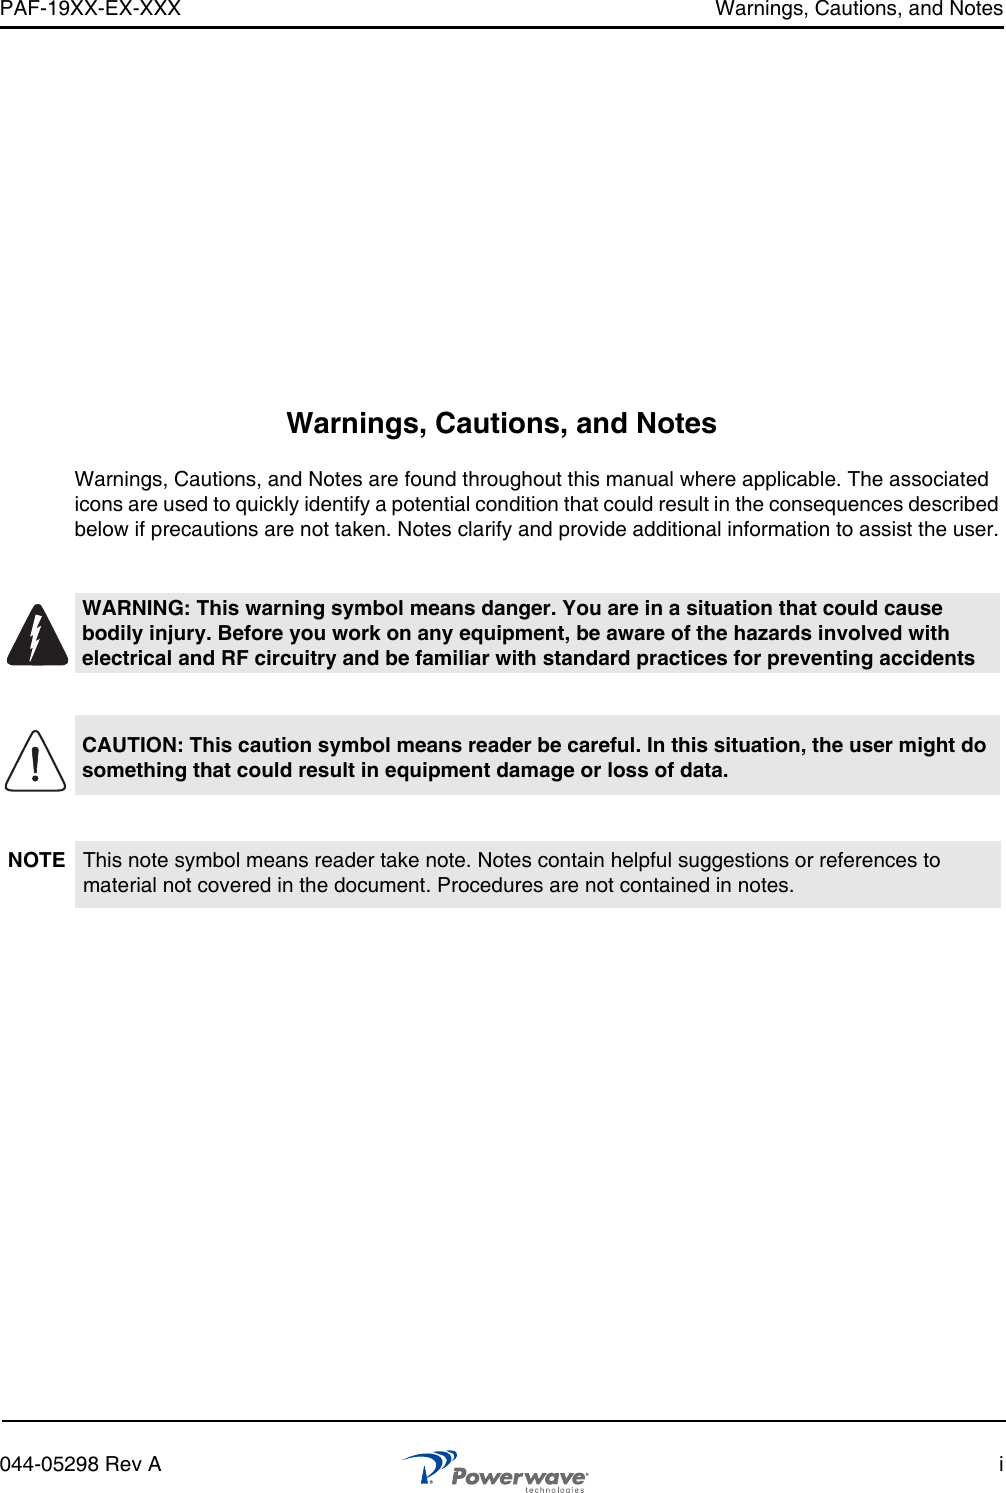 PAF-19XX-EX-XXX Warnings, Cautions, and Notes044-05298 Rev A iWarnings, Cautions, and NotesWarnings, Cautions, and Notes are found throughout this manual where applicable. The associated icons are used to quickly identify a potential condition that could result in the consequences described below if precautions are not taken. Notes clarify and provide additional information to assist the user.WARNING: This warning symbol means danger. You are in a situation that could cause bodily injury. Before you work on any equipment, be aware of the hazards involved with electrical and RF circuitry and be familiar with standard practices for preventing accidentsCAUTION: This caution symbol means reader be careful. In this situation, the user might do something that could result in equipment damage or loss of data.NOTE This note symbol means reader take note. Notes contain helpful suggestions or references to material not covered in the document. Procedures are not contained in notes. 